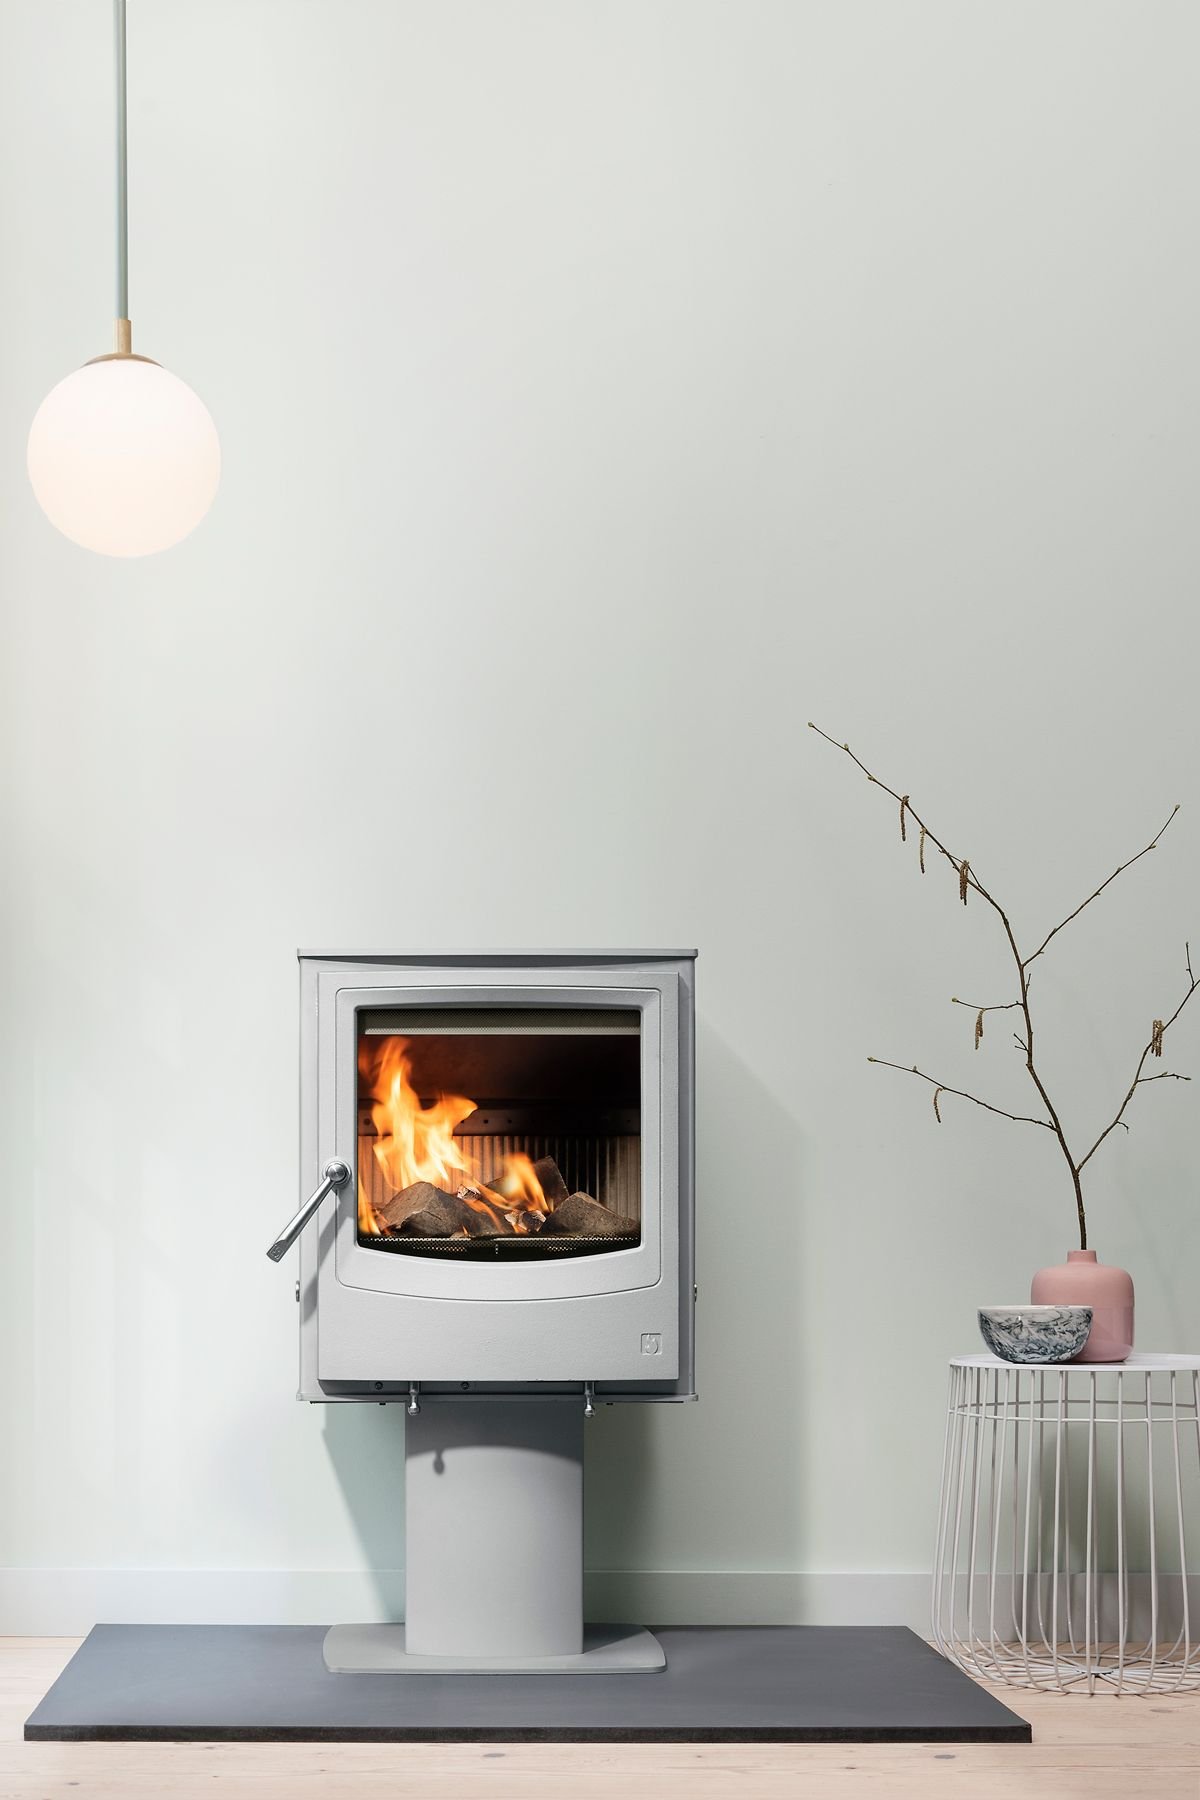 Stylish stoves with clean air credentials